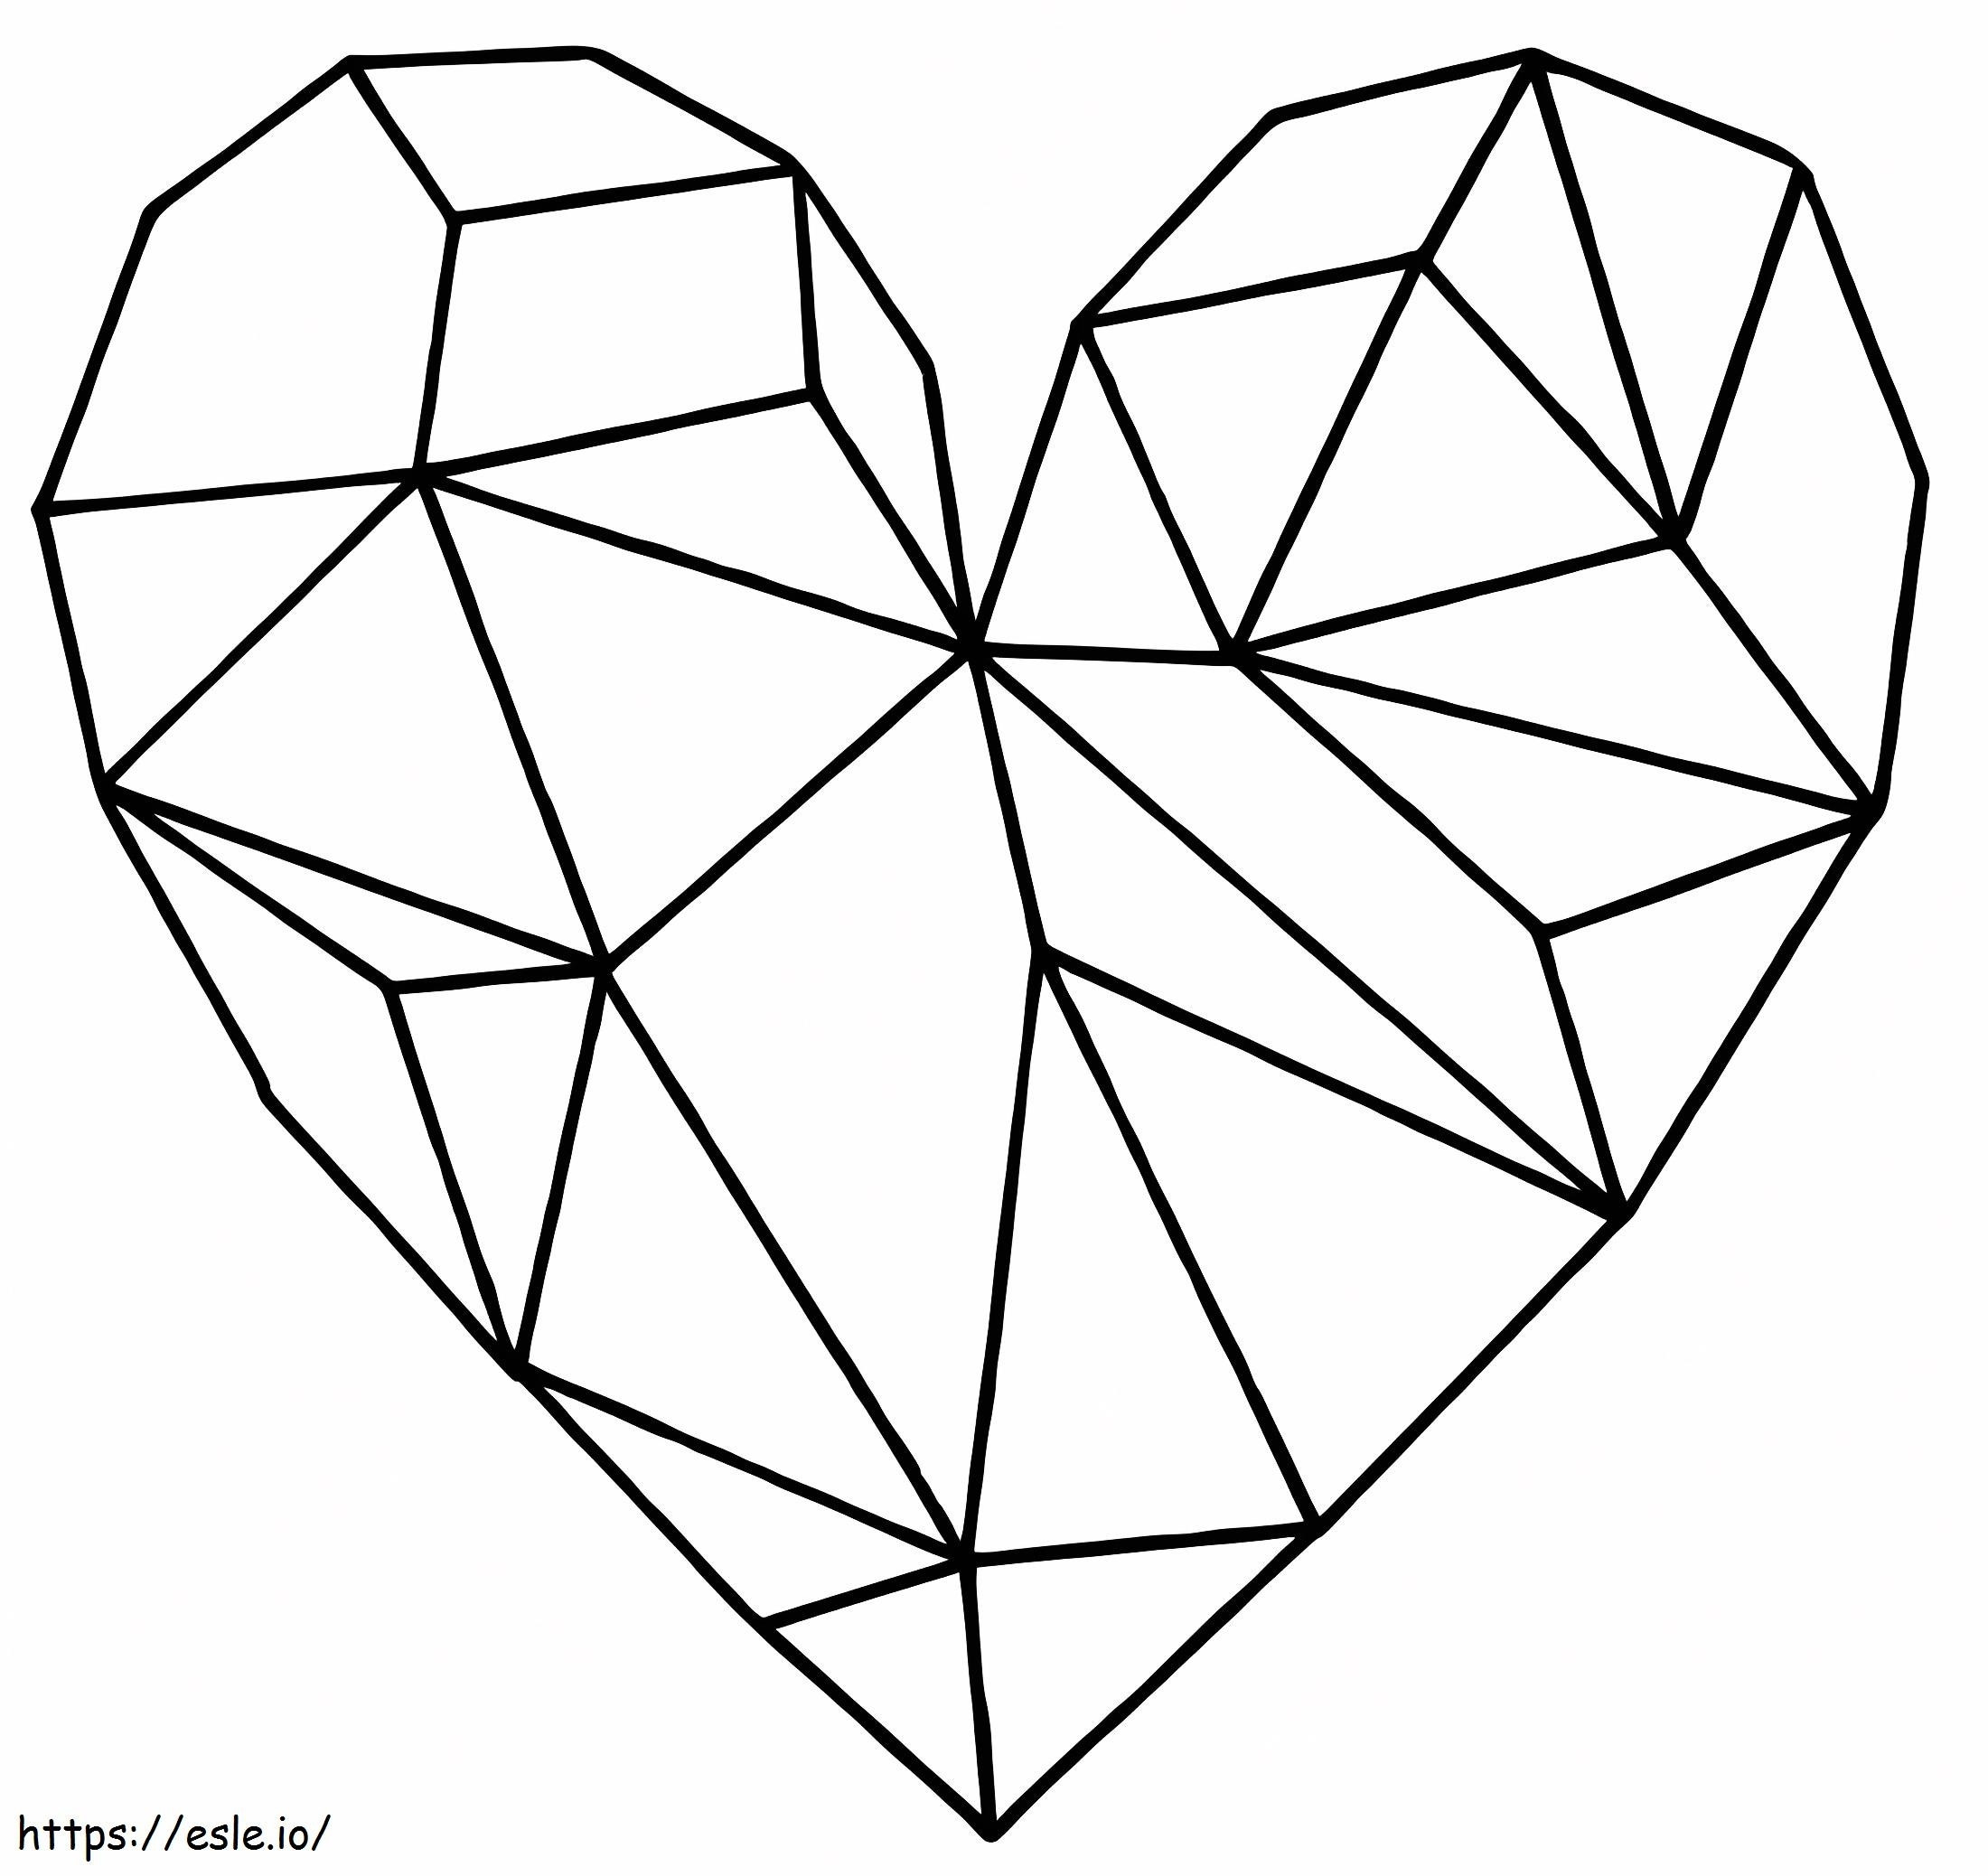 Origami Heart coloring page